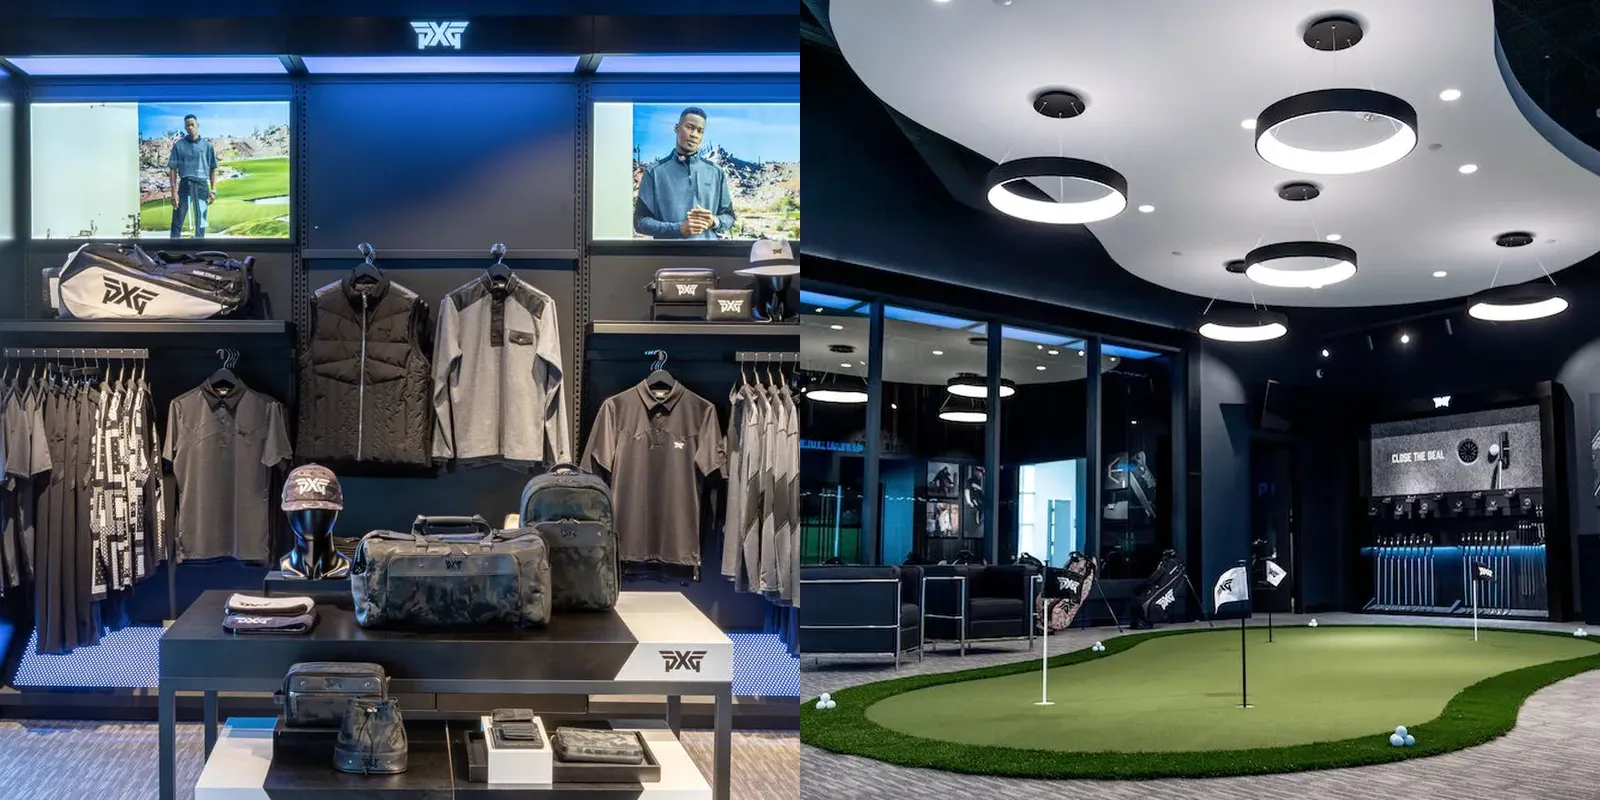 Products and Services offered at PXG Cincinnati